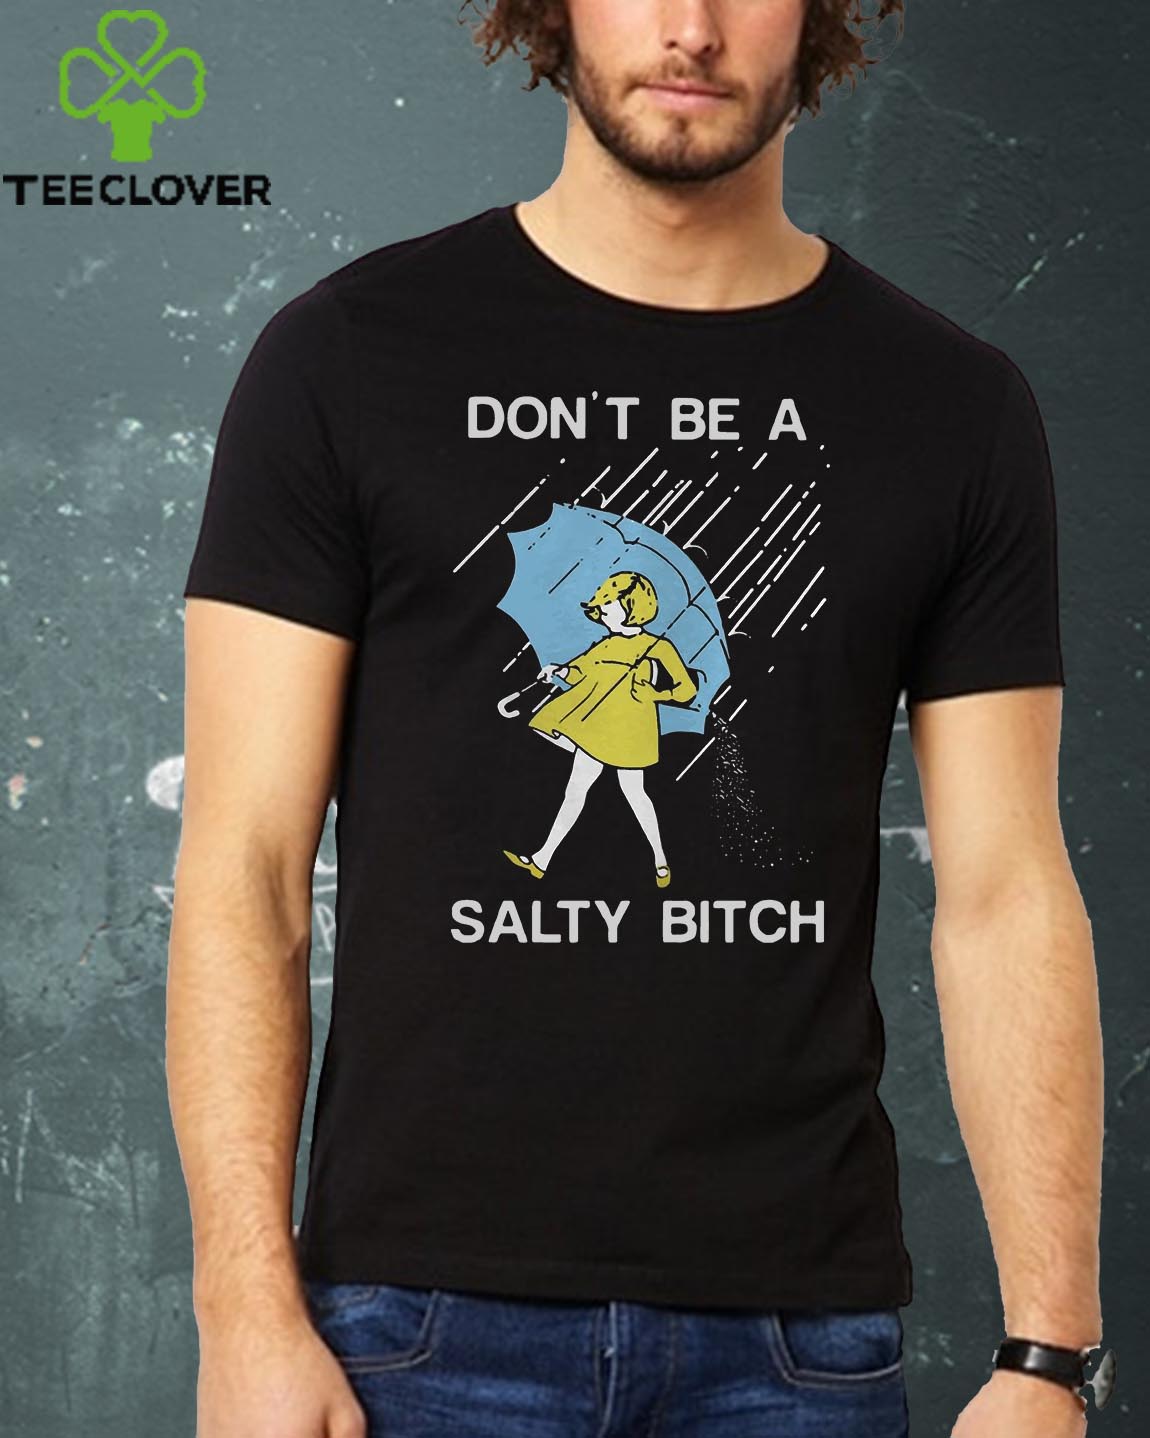 Don't be a Salty bitch